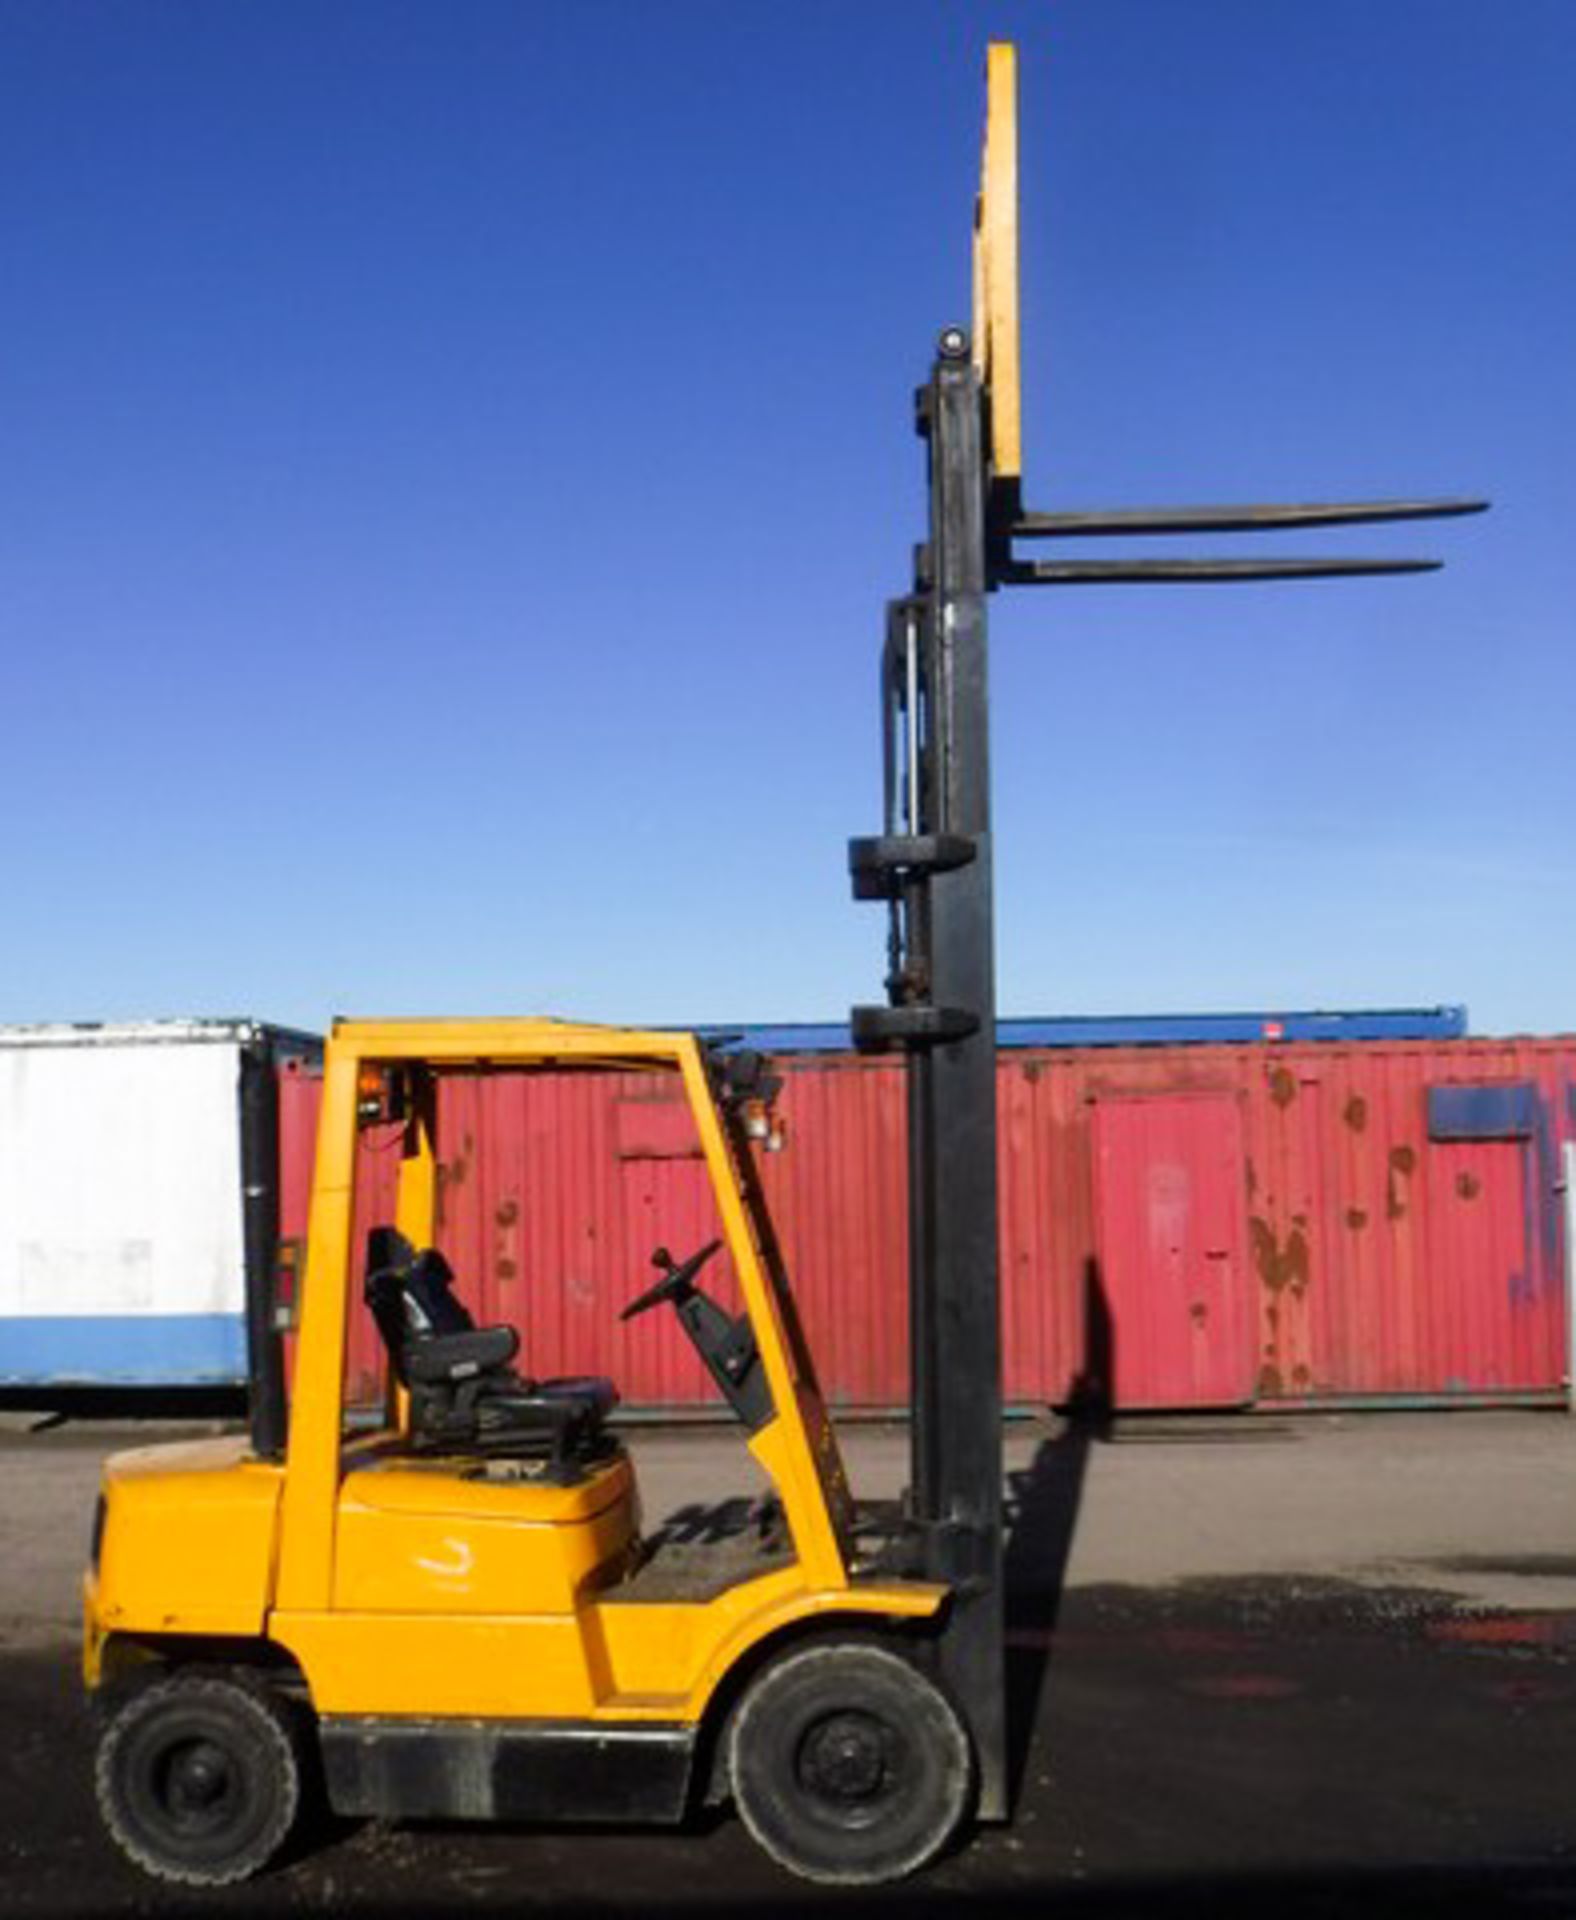 2002 HYSTER H2.50XM DIESEL FORKLIFT. SN H177B327392. 6068 HRS (NOT VERIFIED) - Image 8 of 13